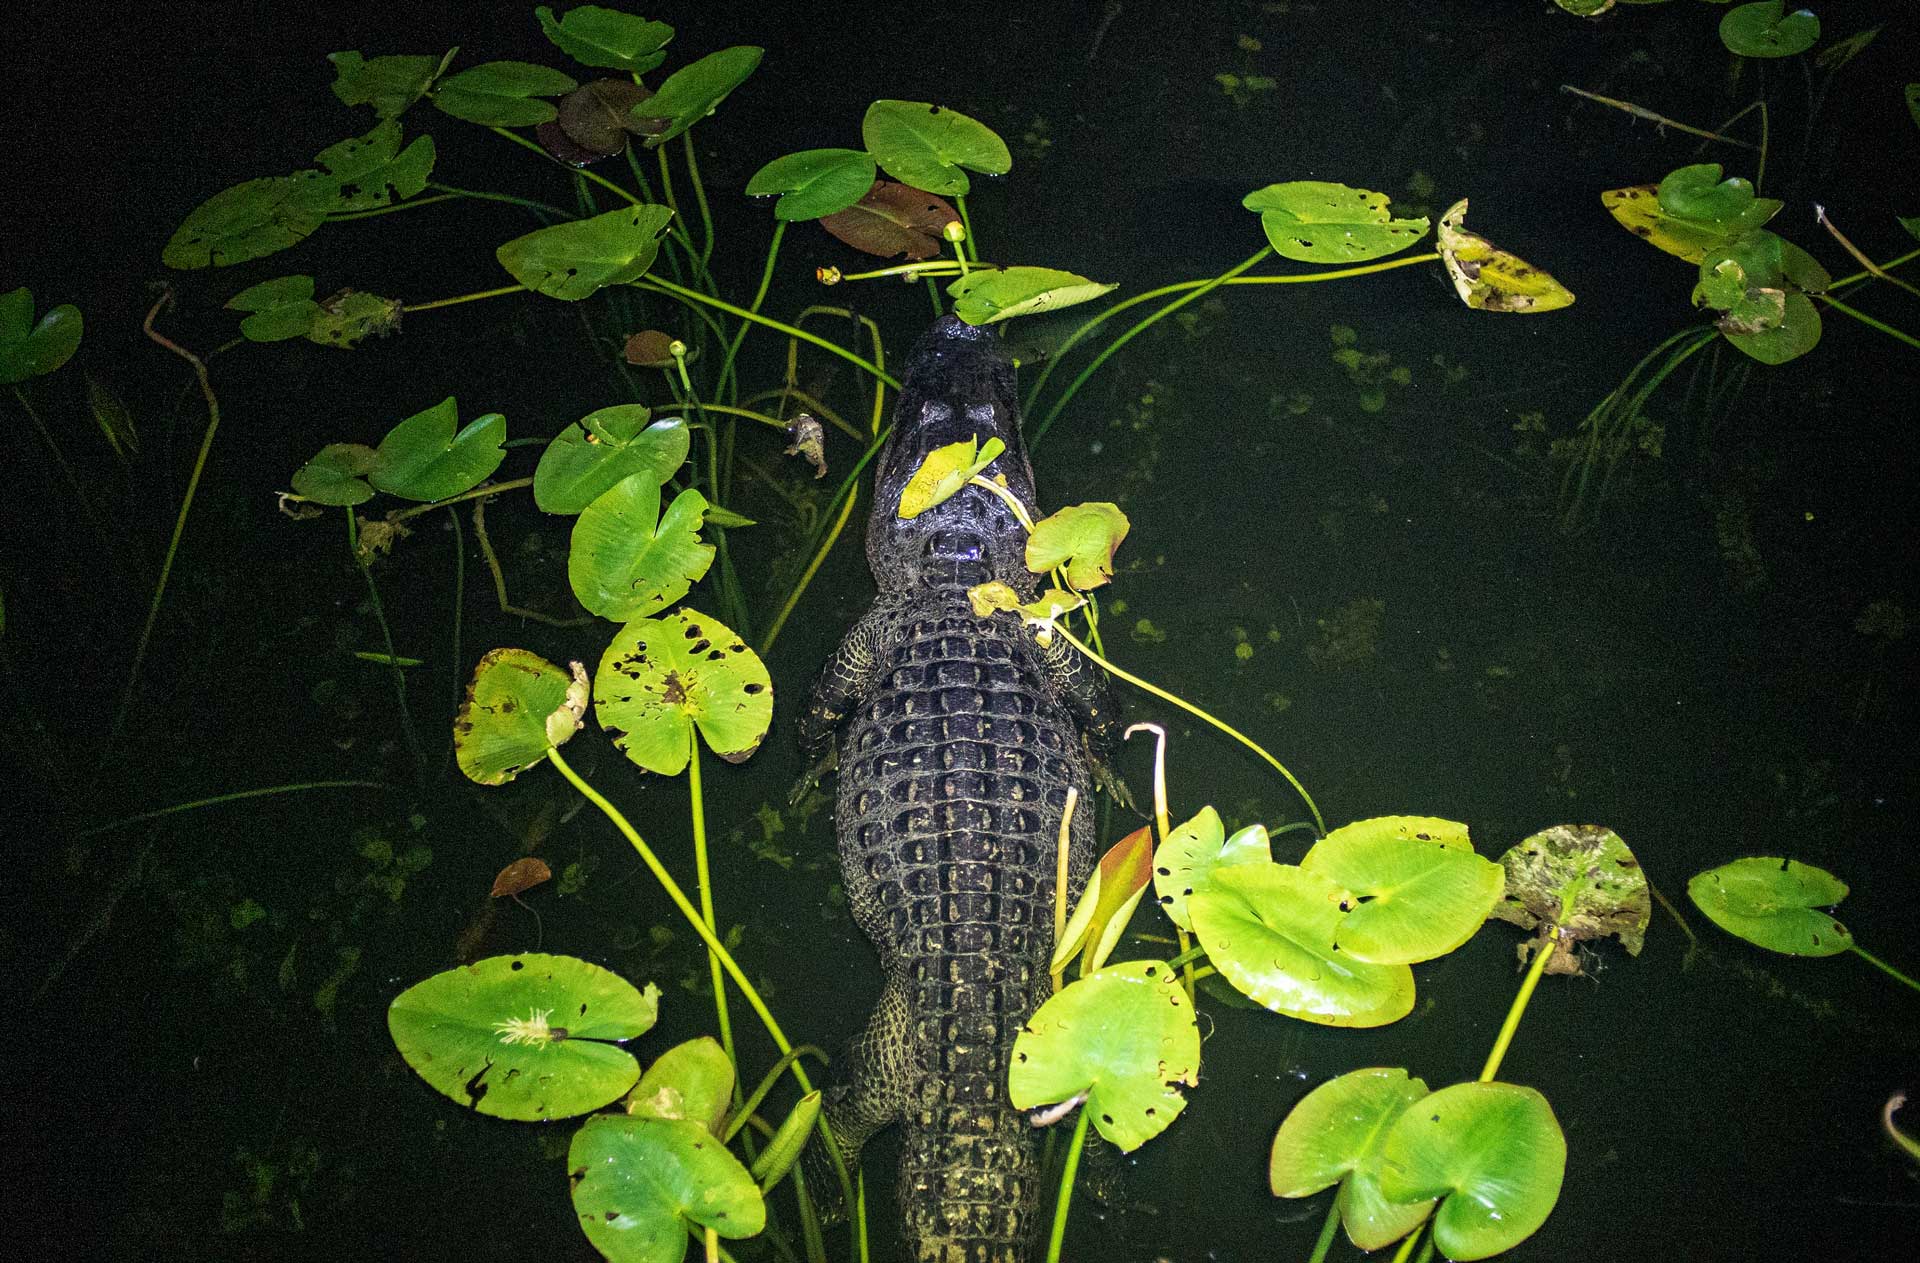 An alligator floating in water illuminated at night with a flashlight.